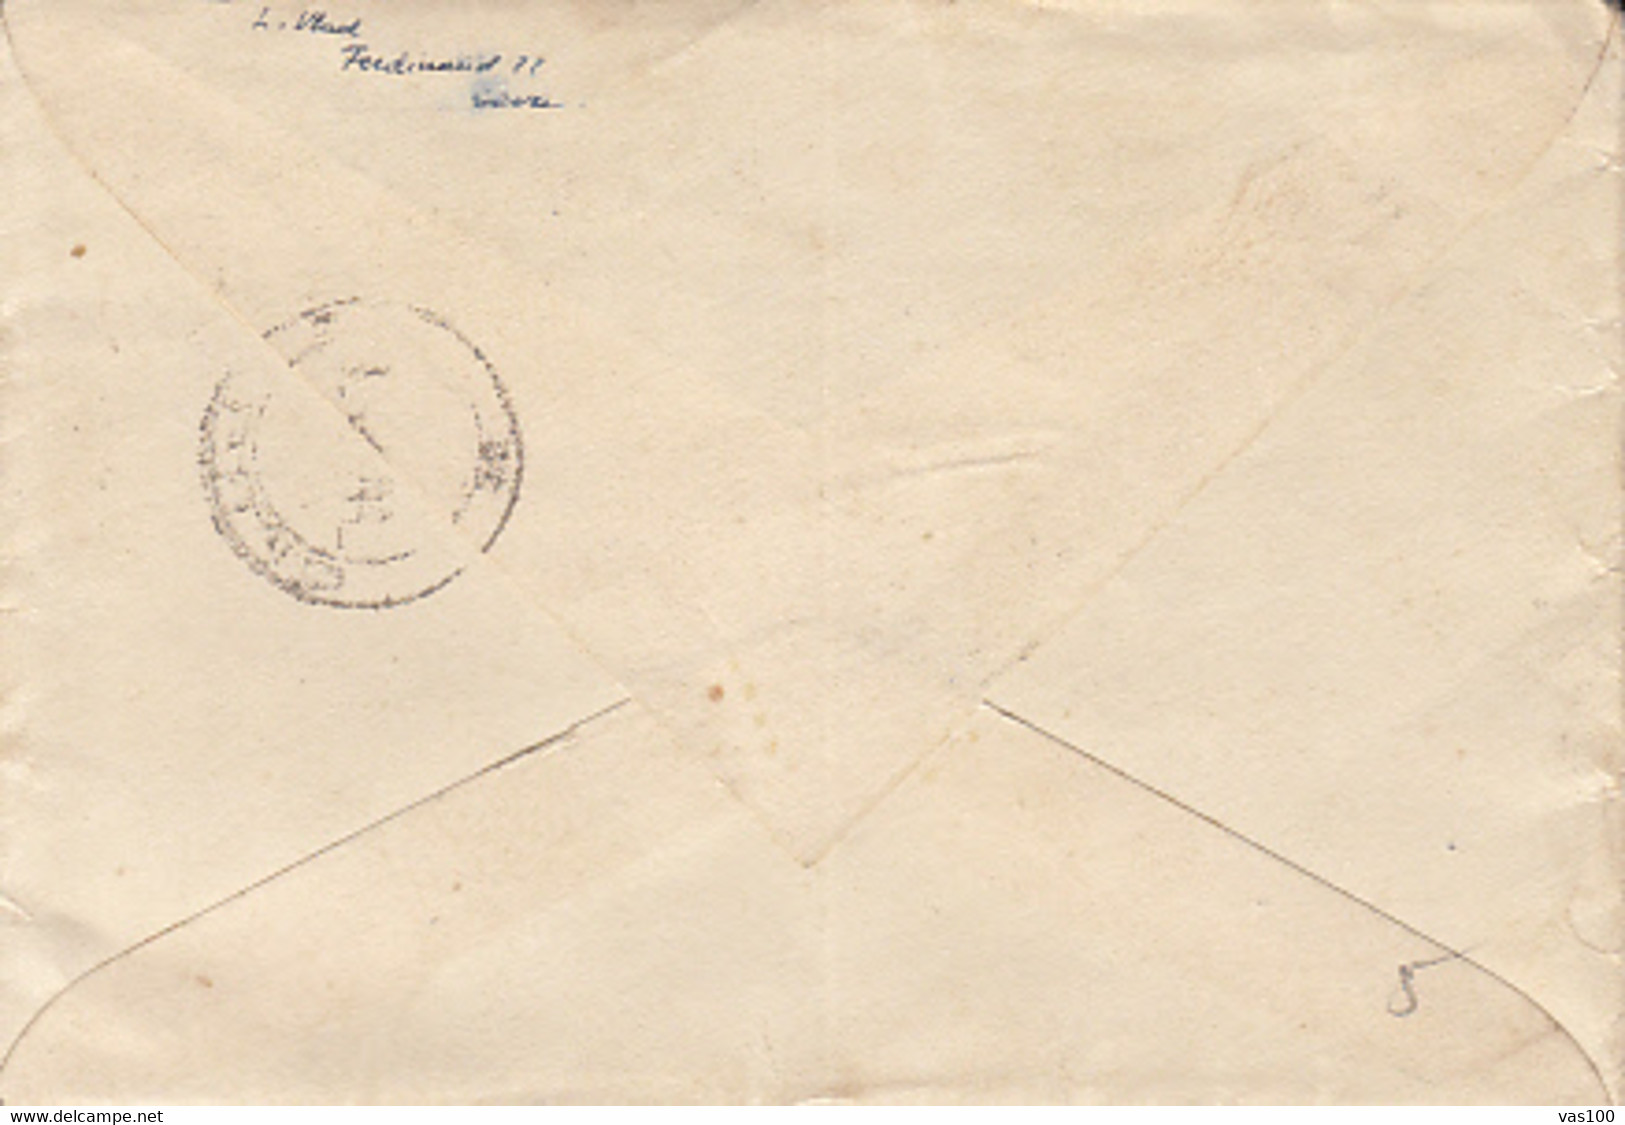 IOVR OVERPRINT REVENUE STAMP, KING MICHAEL, CONSTANTA HARBOUR, SHIP, STAMPS ON REGISTERED COVER, 1948, ROMANIA - Fiscaux